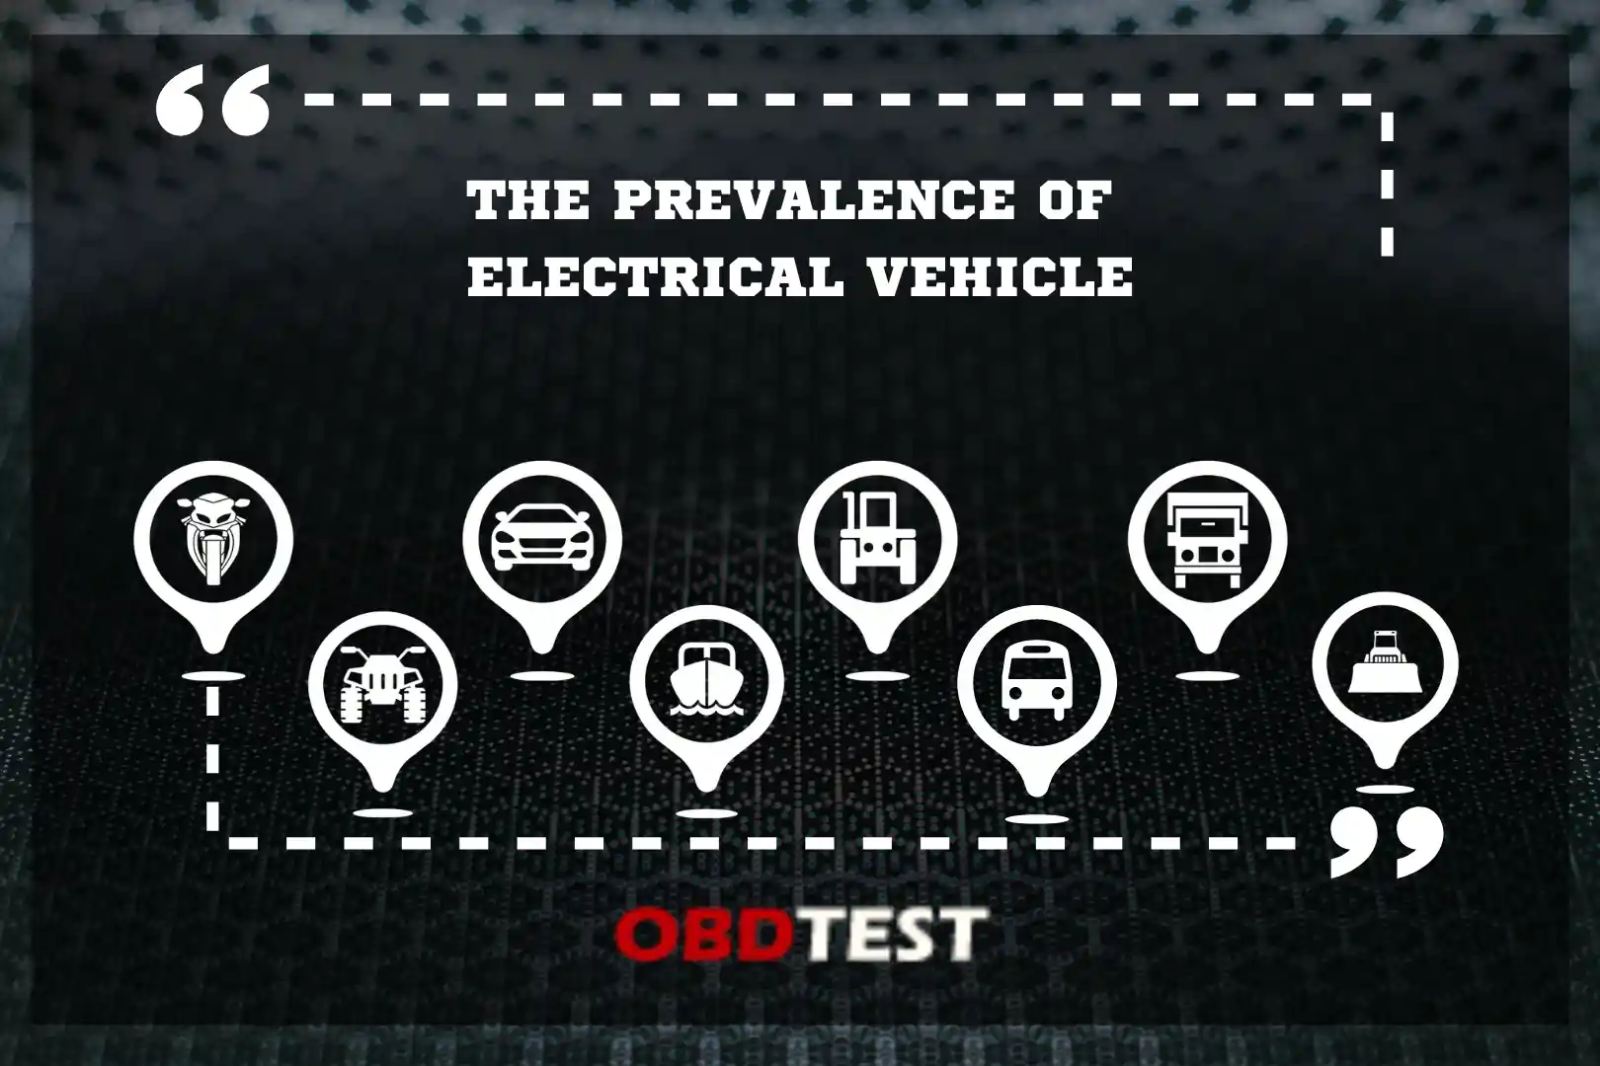 The prevalence of electrical vehicles